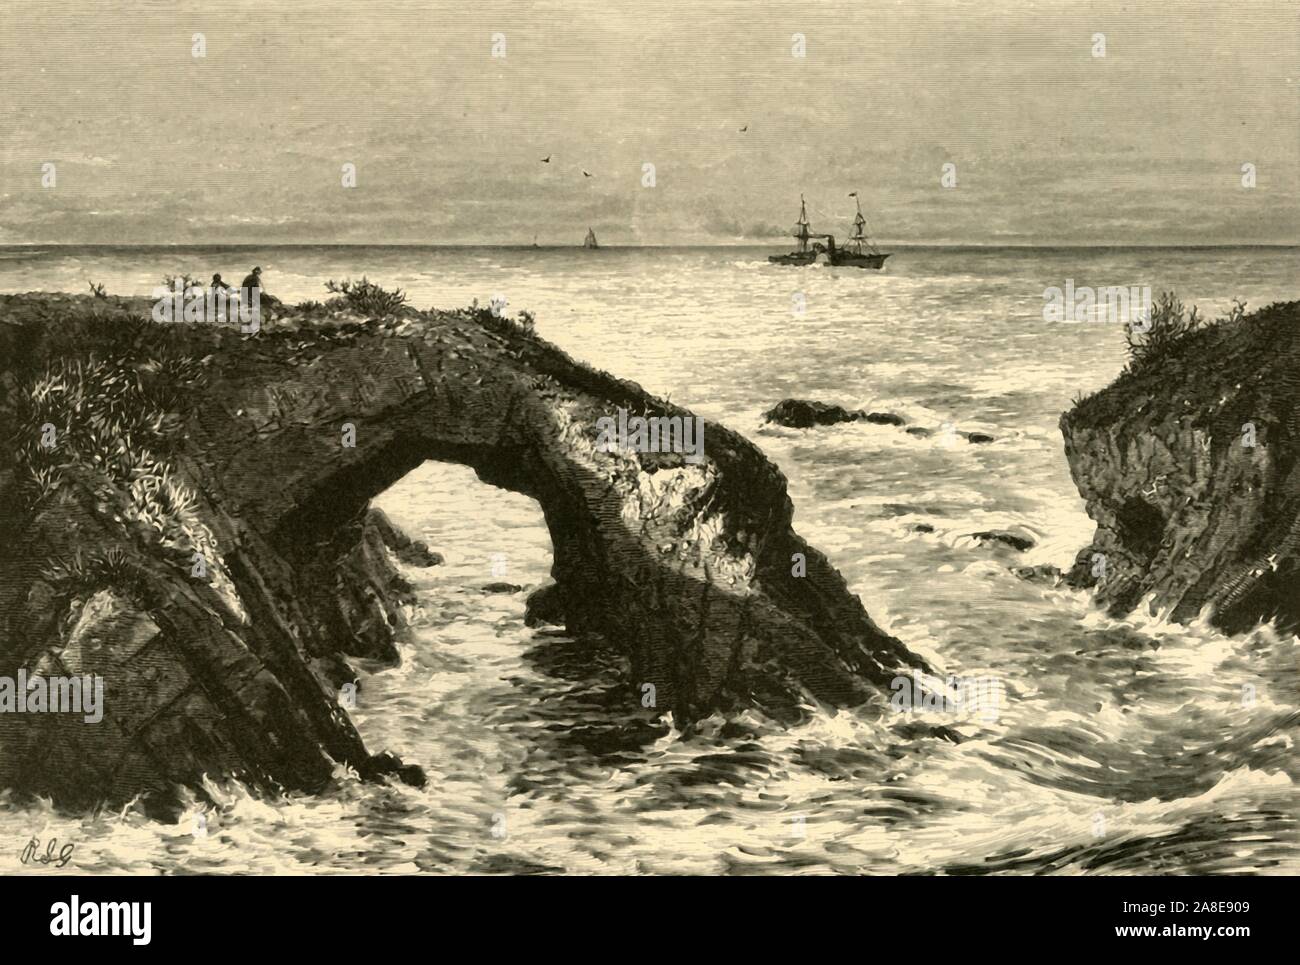 'Coast of Mendocino', 1872. Rock arch on the shore of the Pacific Ocean, California, USA. 'Nothing can be more tumultuous or less pacific than the waters of the Pacific Ocean along the Mendocino coast...the waves are twelve feet high and a mile in length, and advance with a solemnity of motion which words cannot describe...the boiling fury with which they crash upon the beach and churn the sands is, at first sight, appalling. Around such isolated rocks as those presented by the artist they rage and raven...they have worn the cliffs into strange and wondrous forms, beating out caverns where the Stock Photo